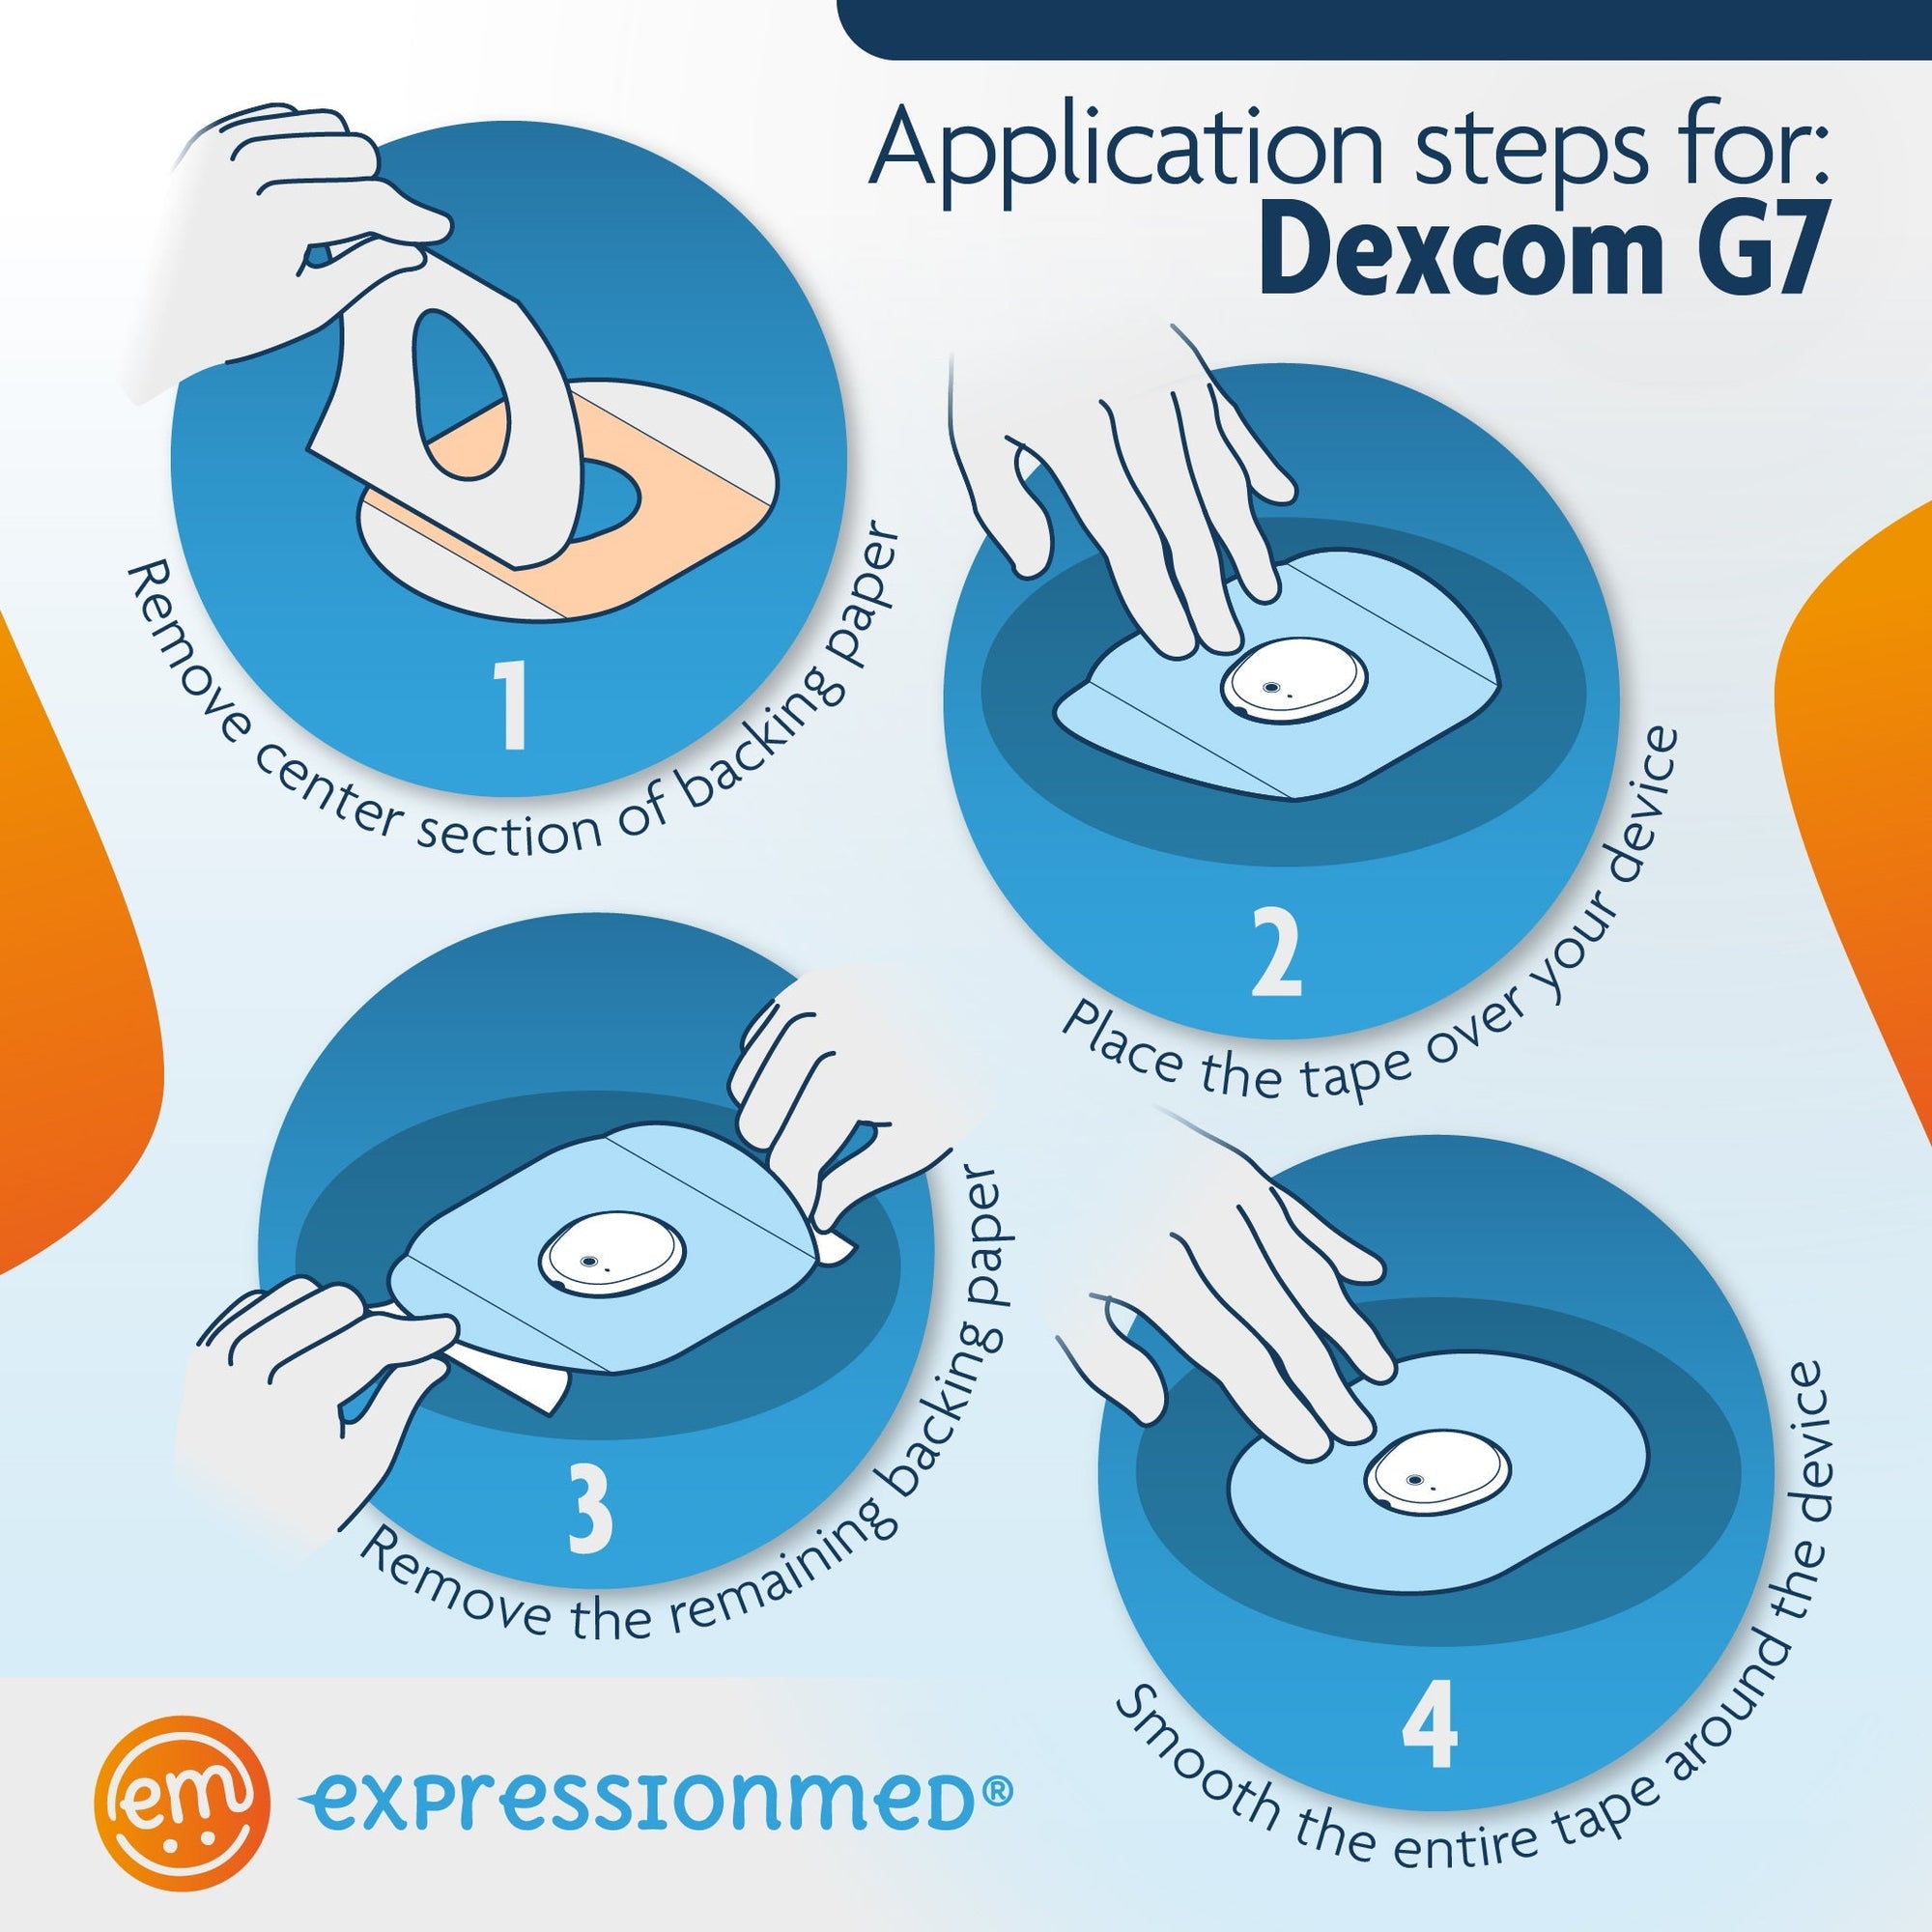 ExpressionMed Application Instructions . 1. Prep skin with soap and water. 2. Remove Middle Section and lay center hole over device. 3. Peel off both end sections and smooth down on skin. To remove, hold an edge and strech material off skin., Dexcom Stelo Glucose Biosensor System